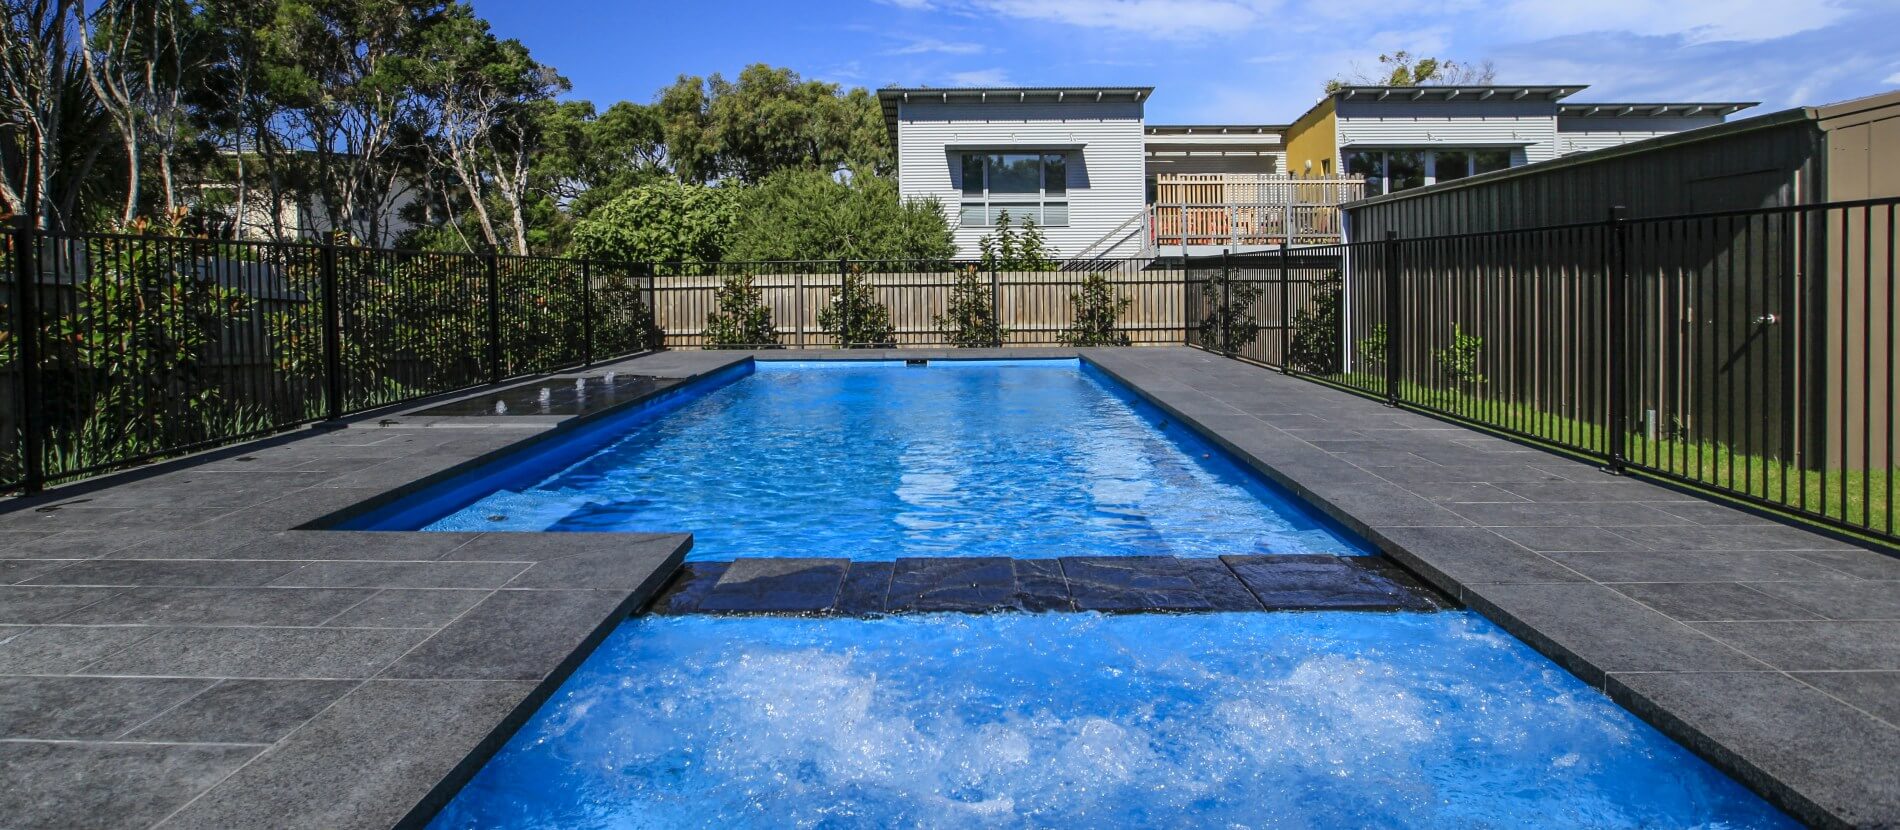 Compass-Pools-Australia_X-Trainer-9.4m-fibreglass-pool-and-spa-combo-with-in-floor-cleaning-in-Sapphire-Blue-colour-with-Sunpod-bubbler